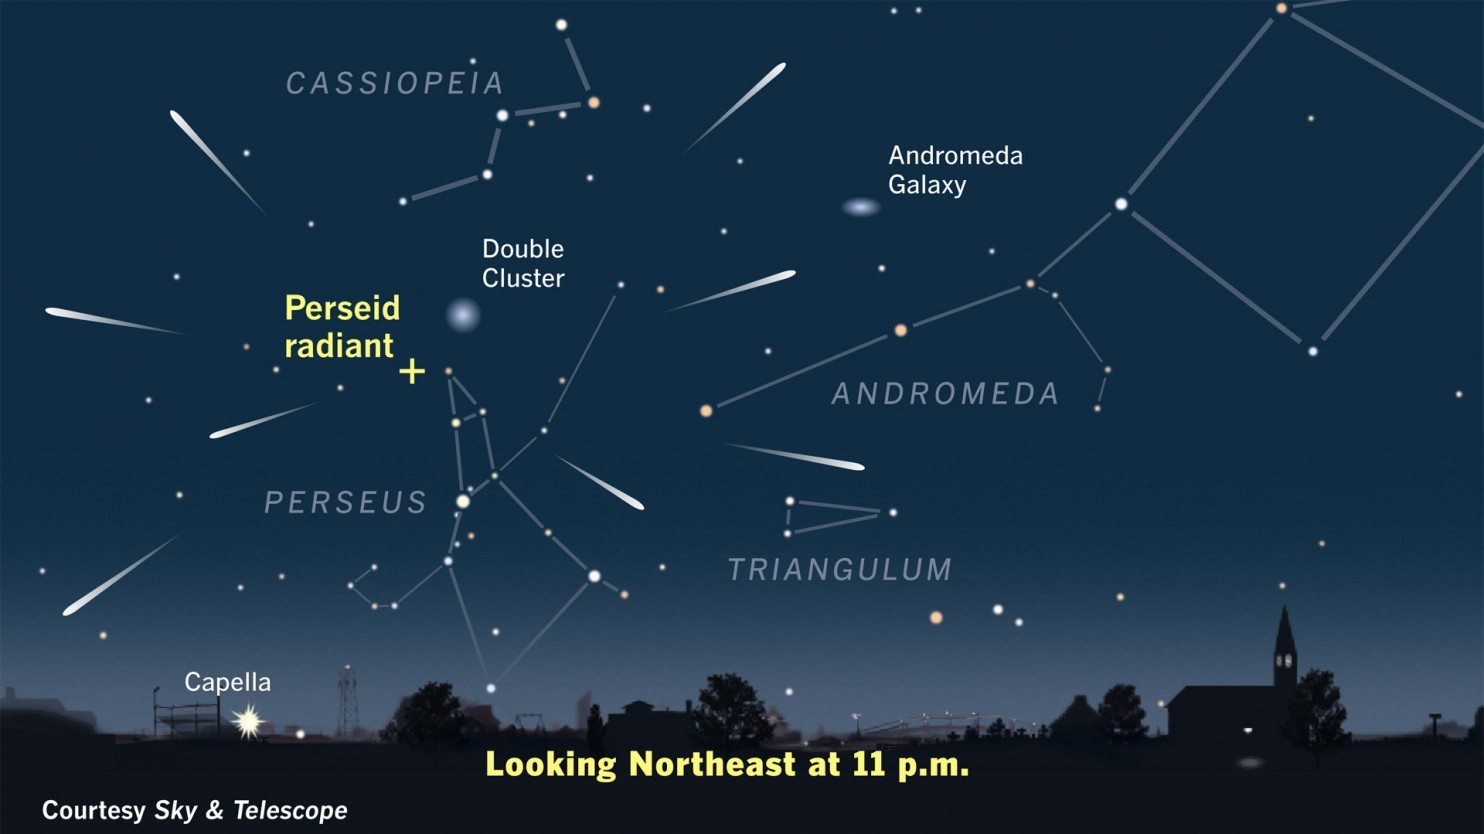 The Perseid meteors will appear to radiate from the Perseus constellation in the northeast sky. (Map courtesy of Sky & Telescope Magazine) (Click on image to enlarge)